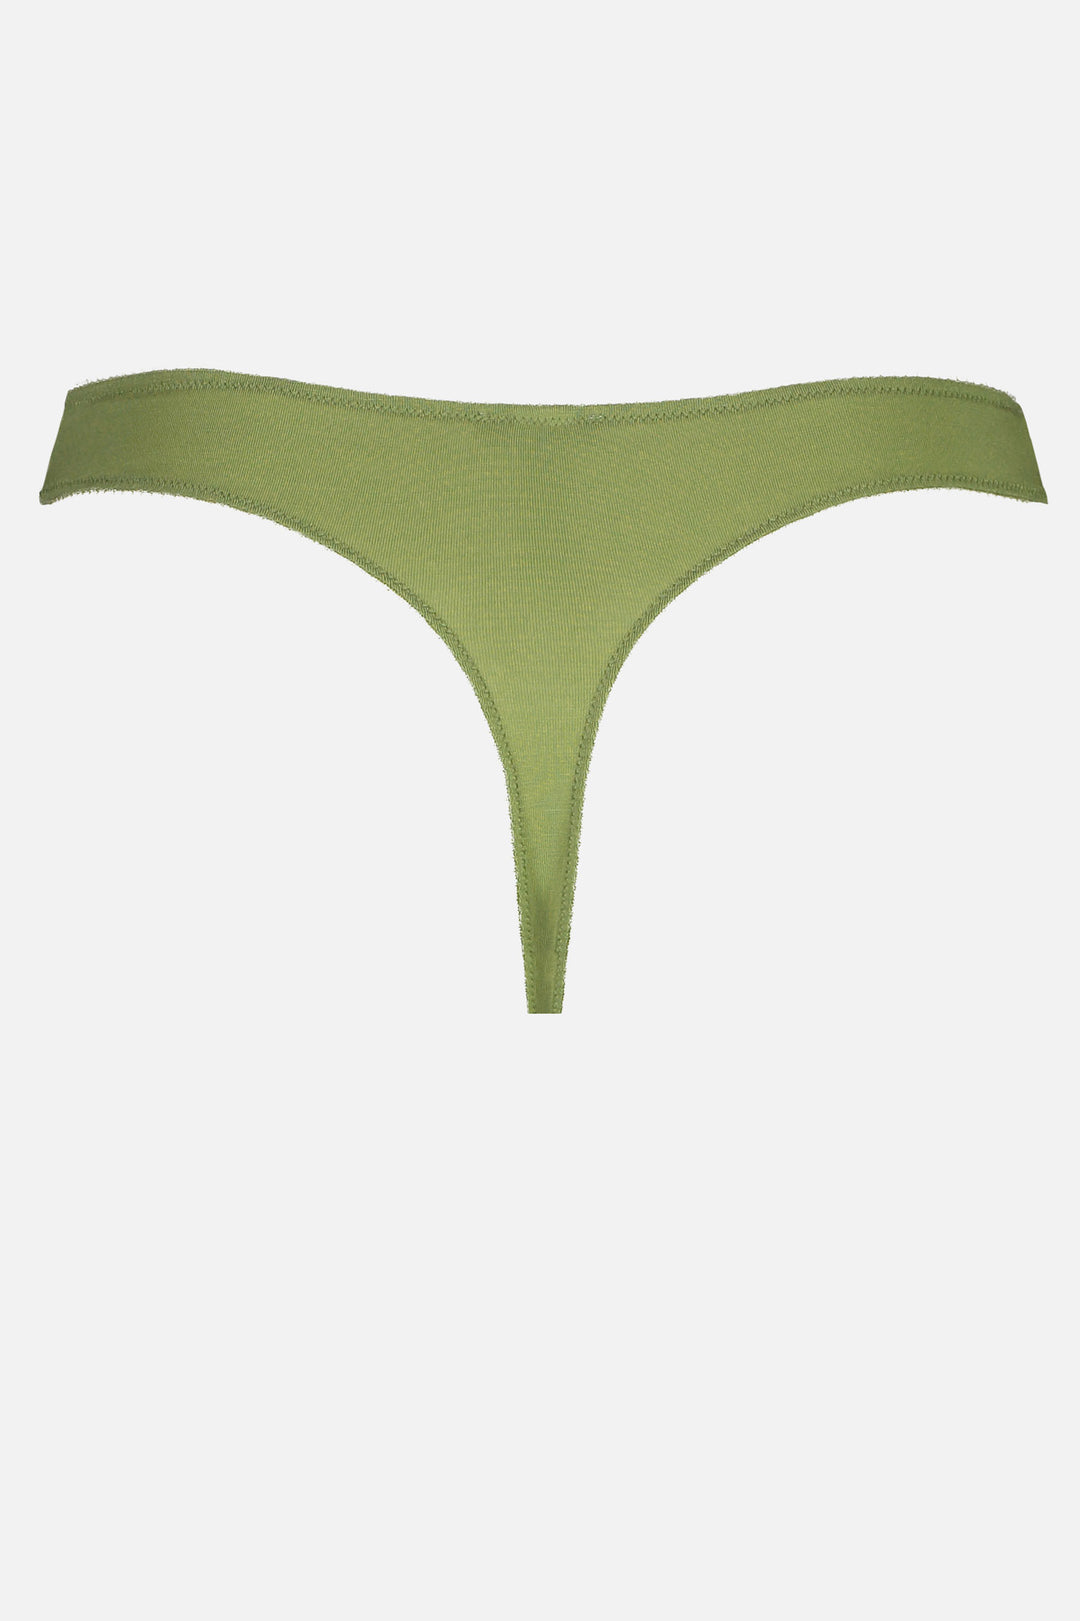 Videris Lingerie thong in olive TENCEL™ a comfortable flattering wide g string back with soft elastics